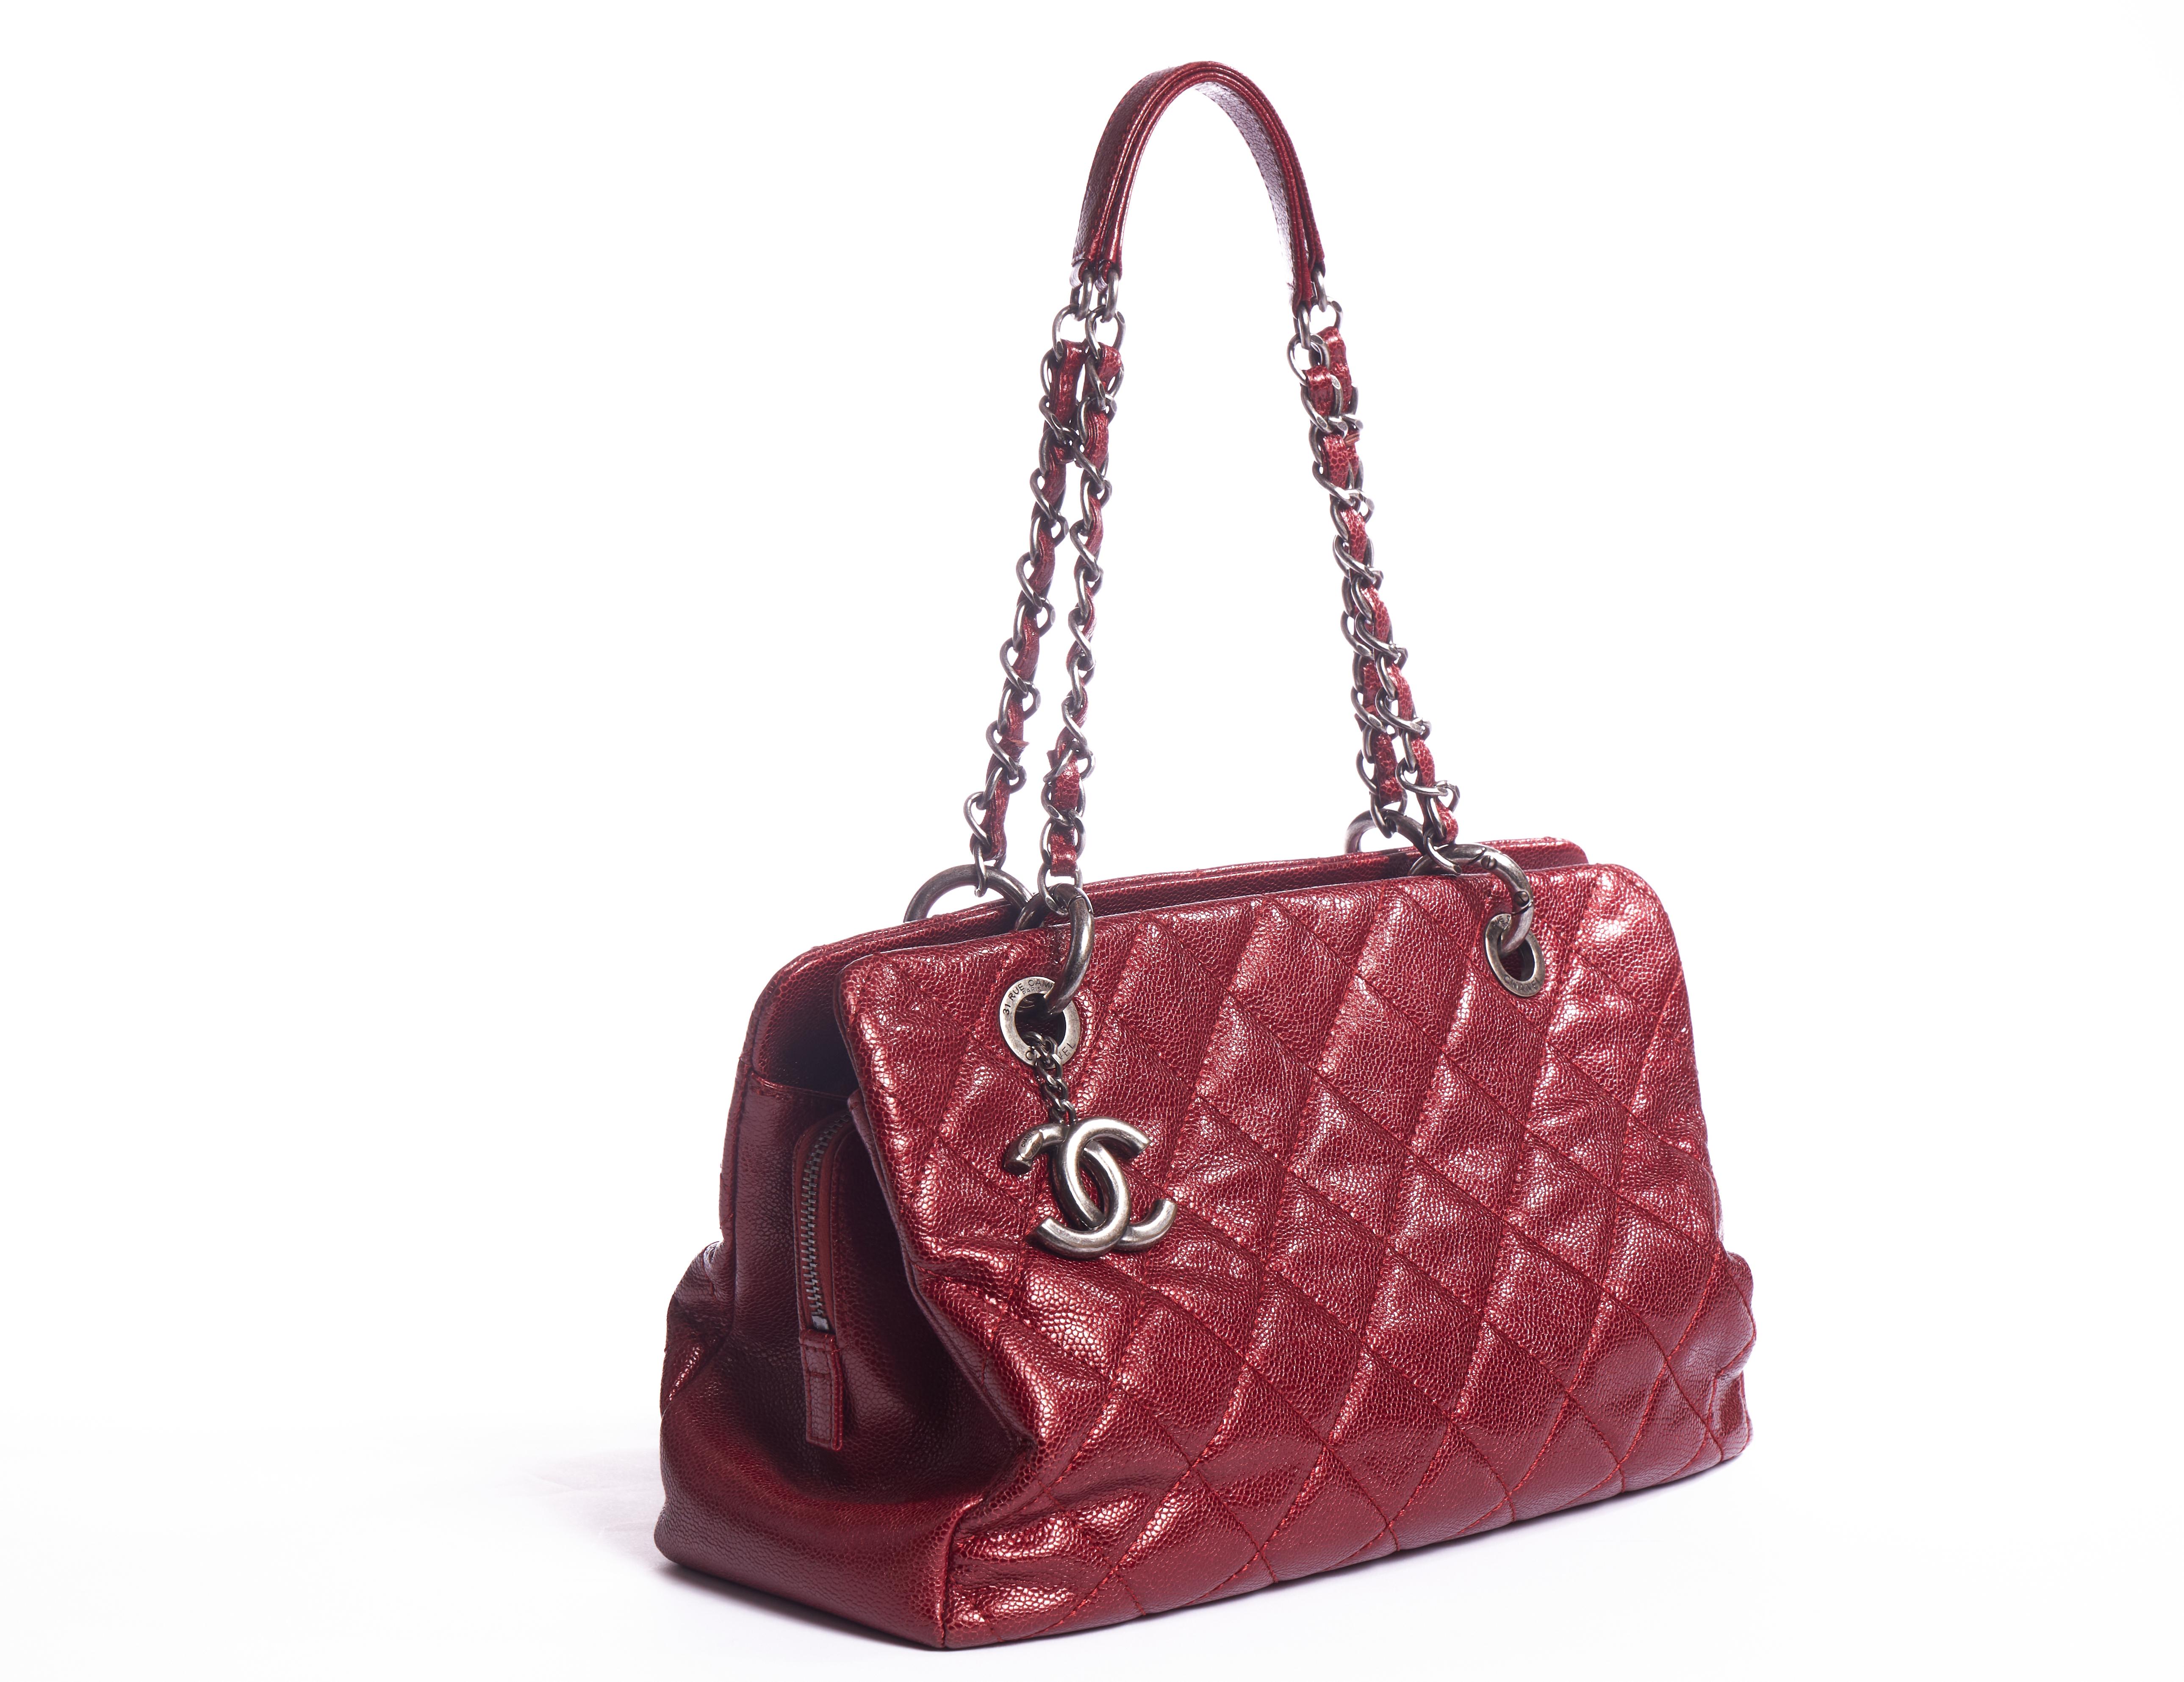 Chanel cherry red shiny caviar leather shoulder tote with gunmetal hardware. One zipped center compartment and 2 side open ones. Shoulder drop 9